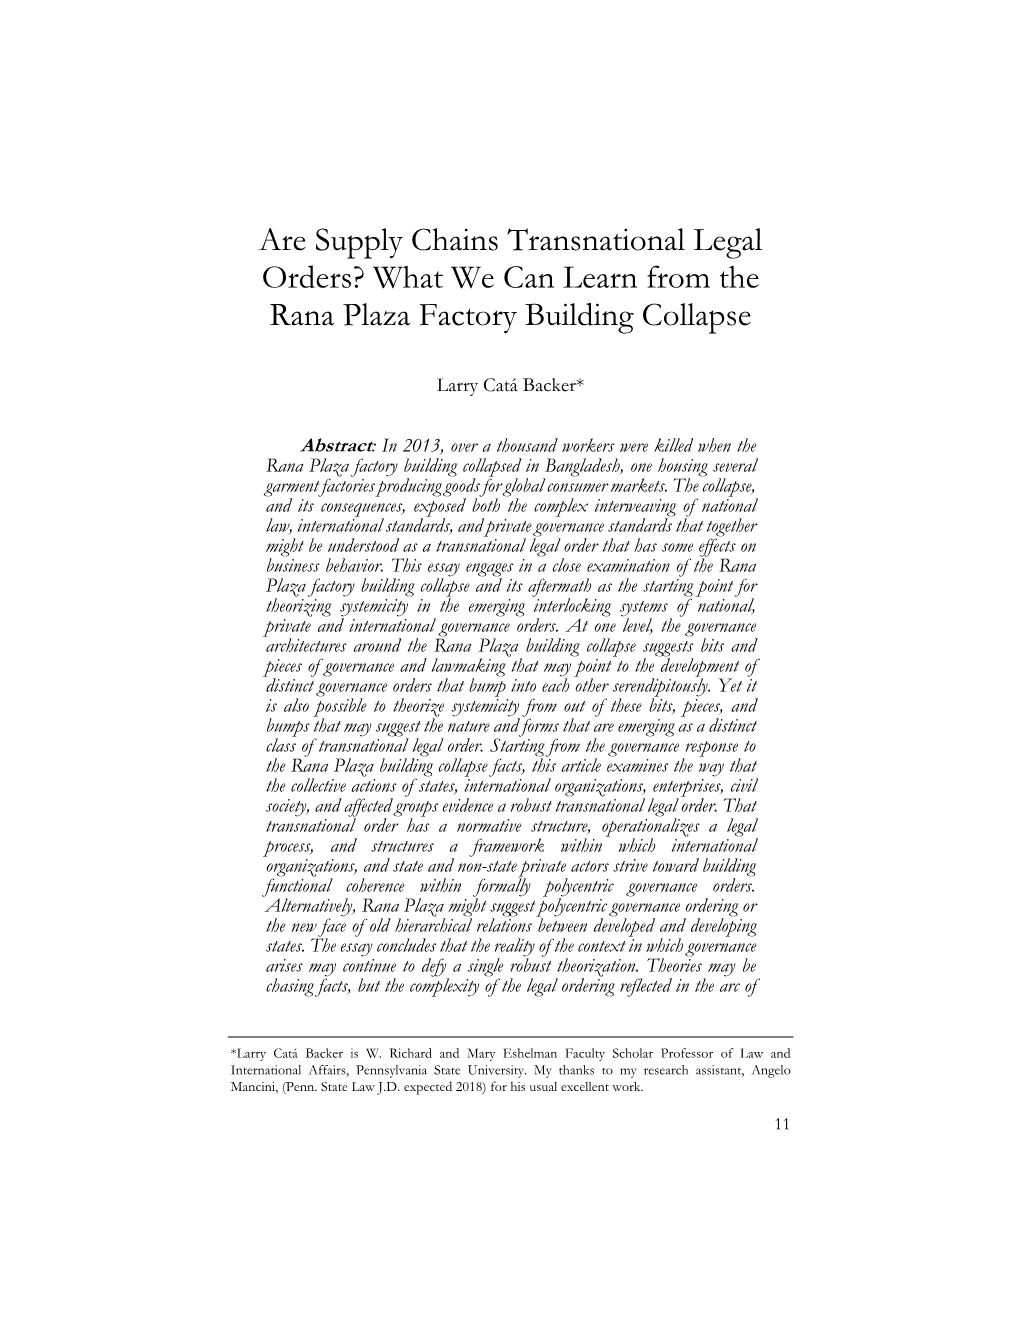 Are Supply Chains Transnational Legal Orders? What We Can Learn from the Rana Plaza Factory Building Collapse